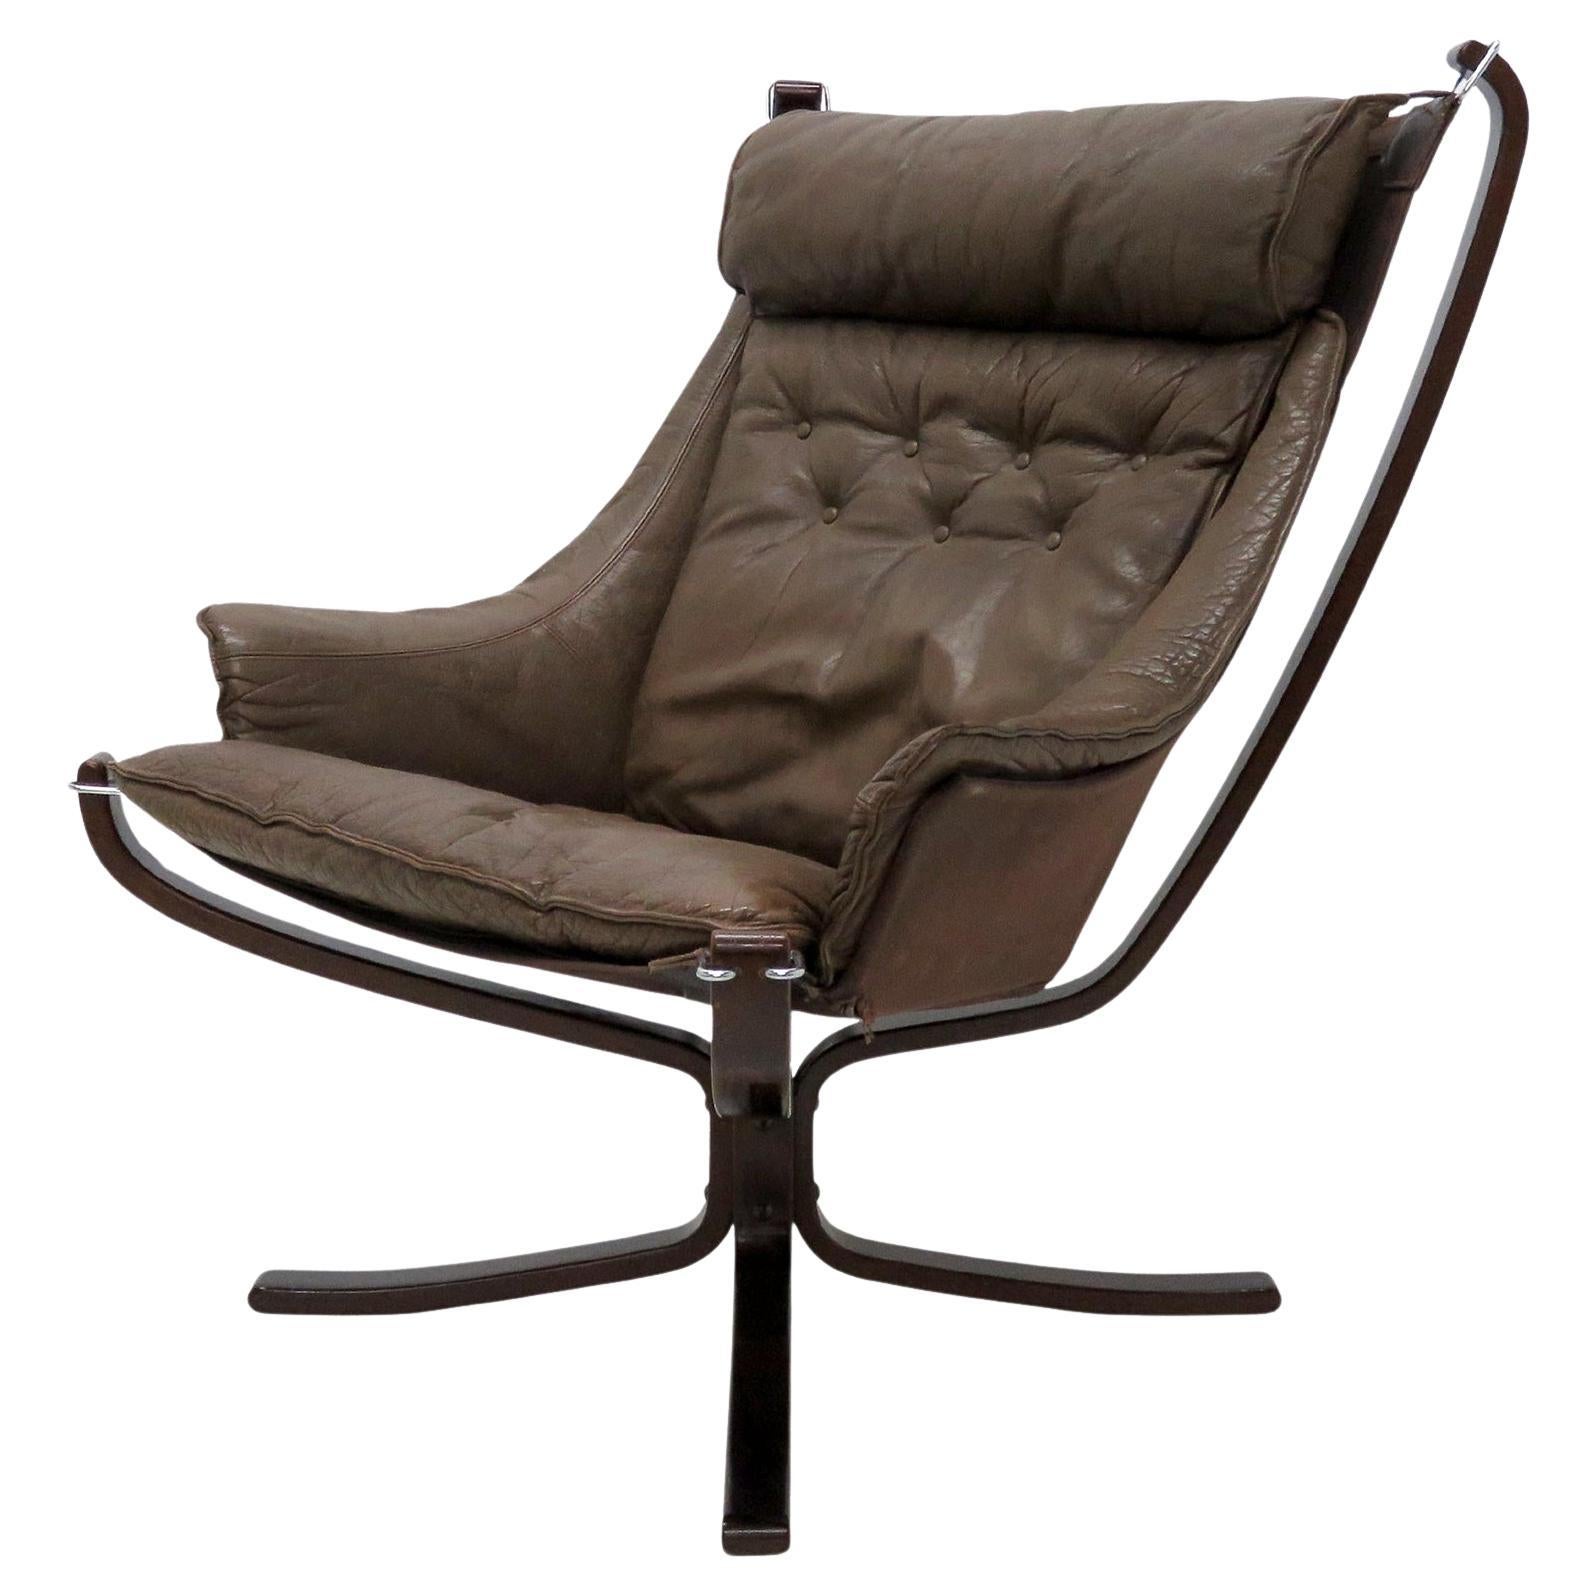 Sigurd Resell Falcon Chair, 1970 For Sale